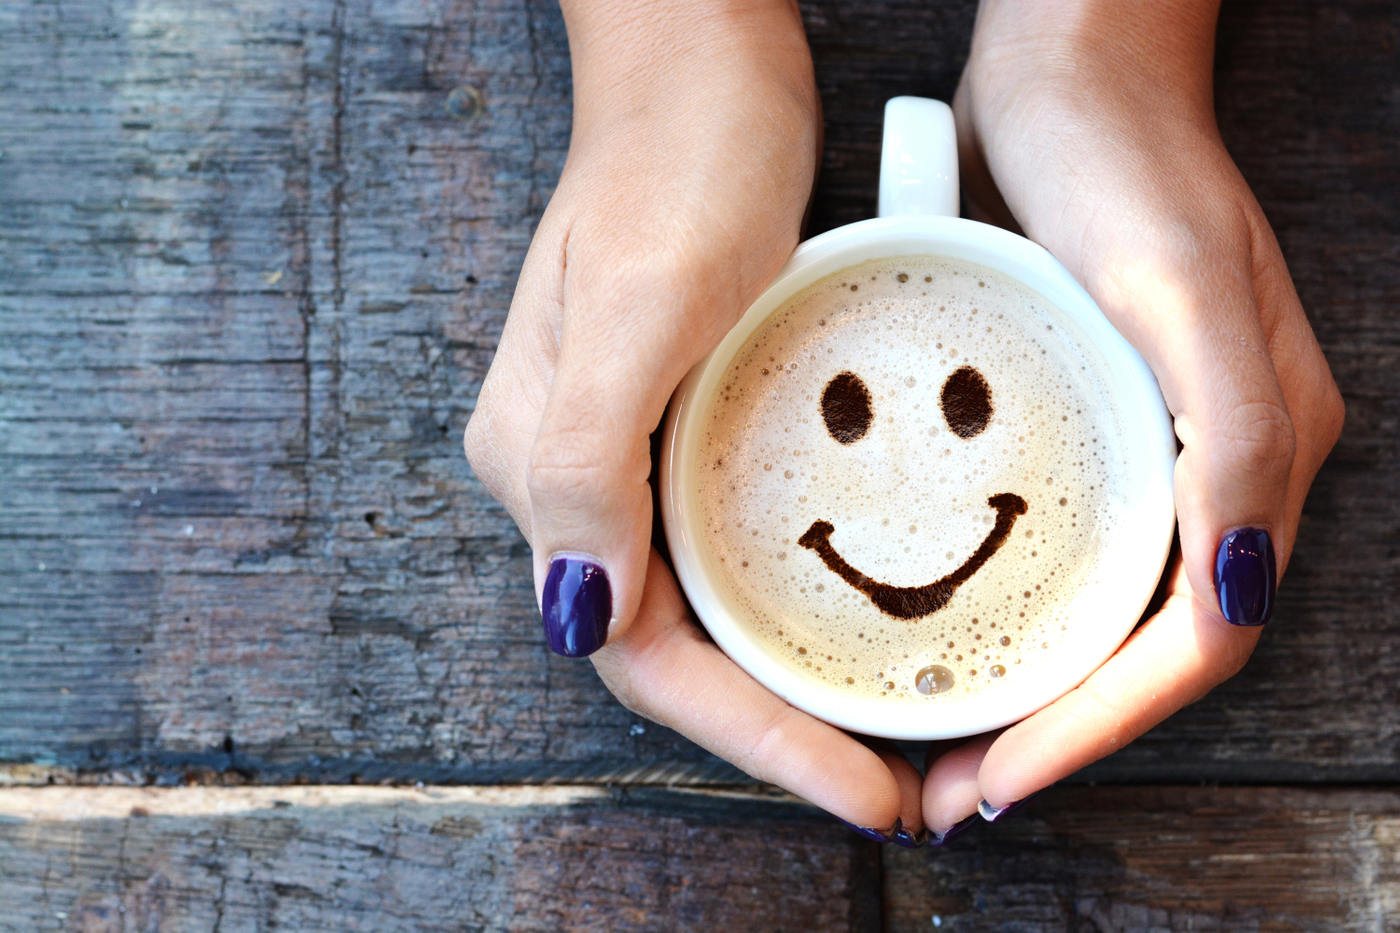 A happy face made from milk foam is seen in a mug of coffee